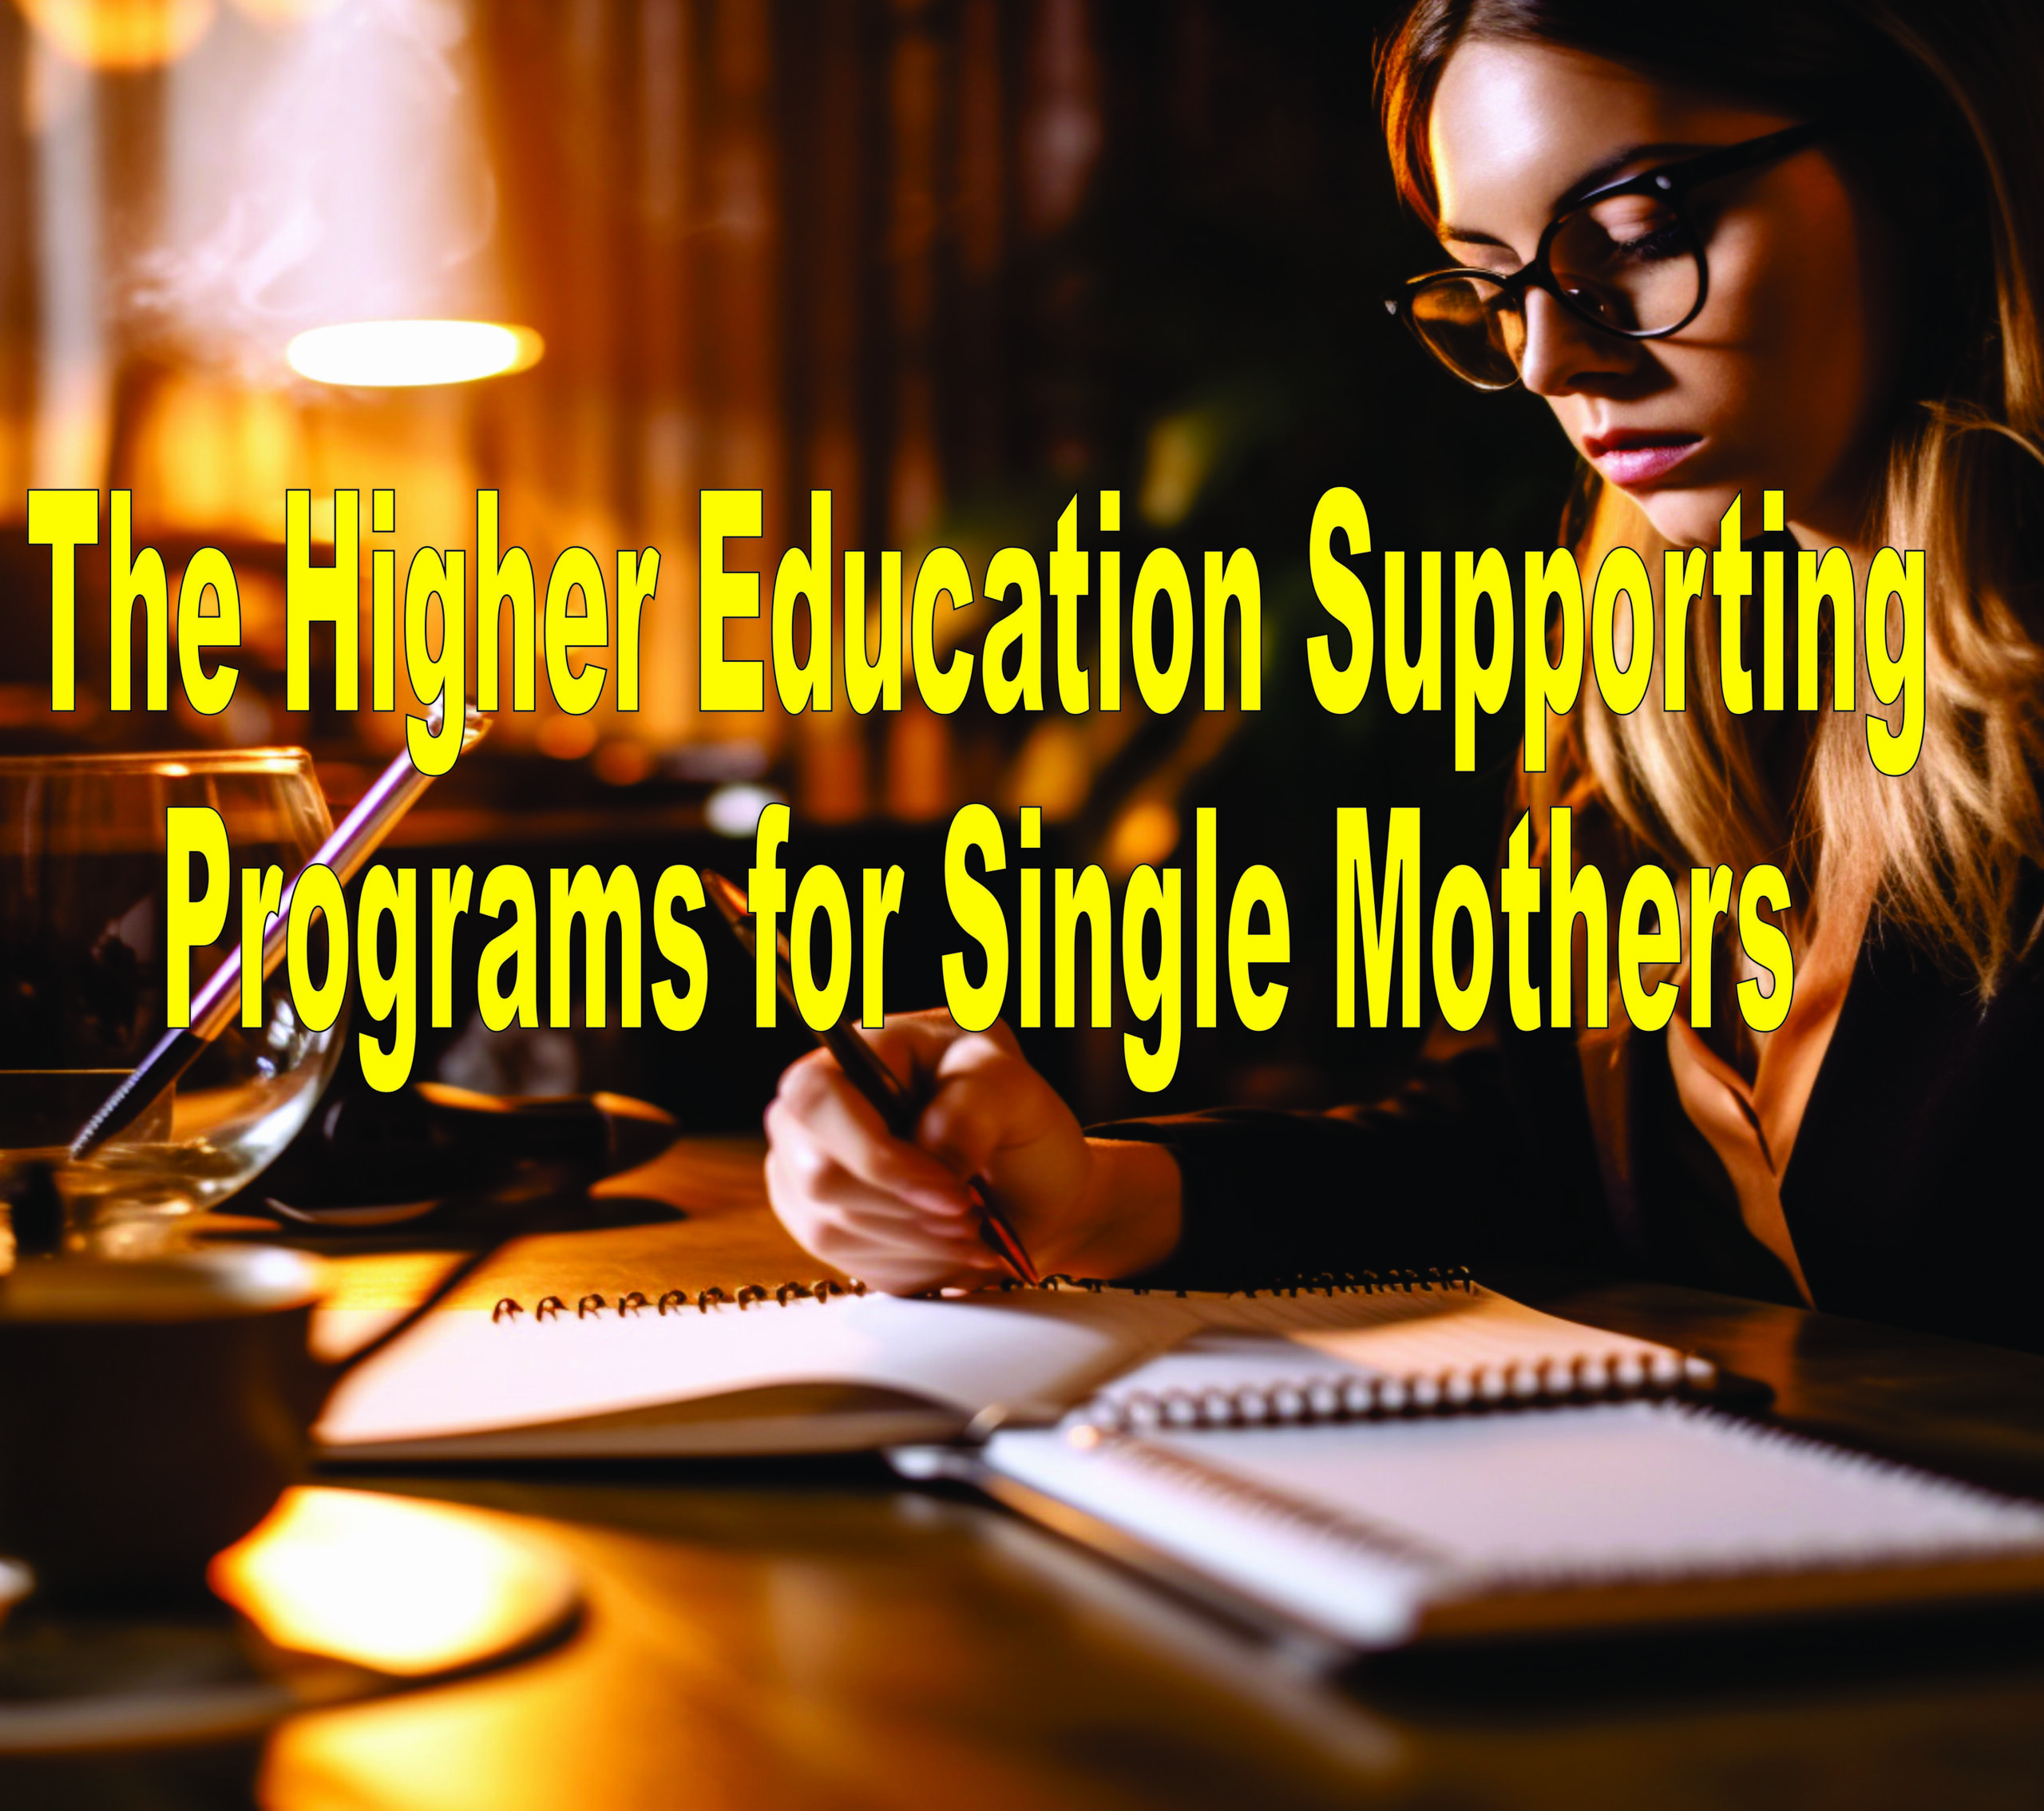 The Higher Education Supporting Programs For Single Mothers